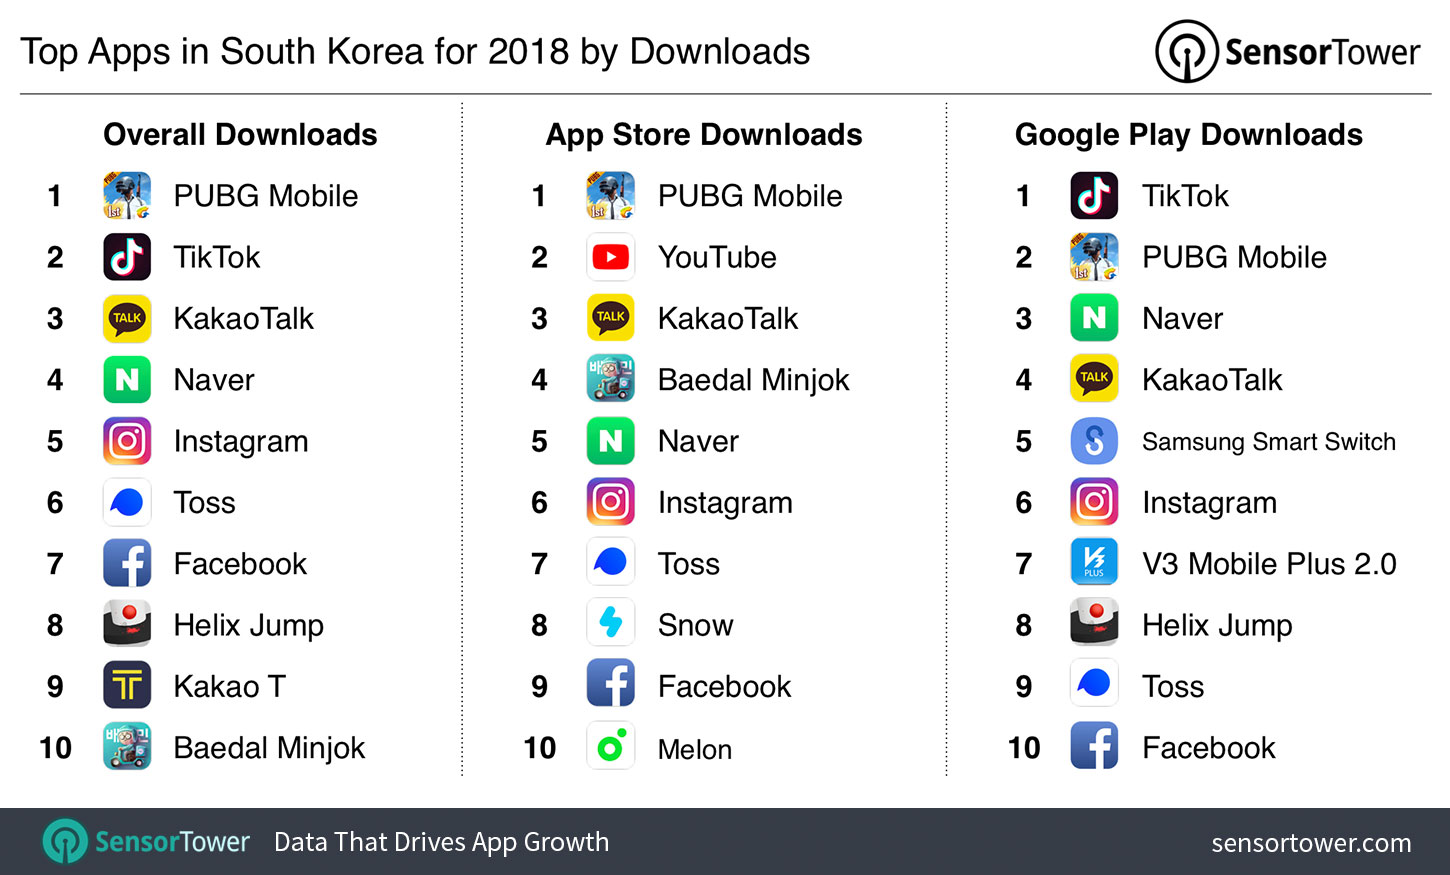 Top Apps in South Korea for 2018 by Downloads